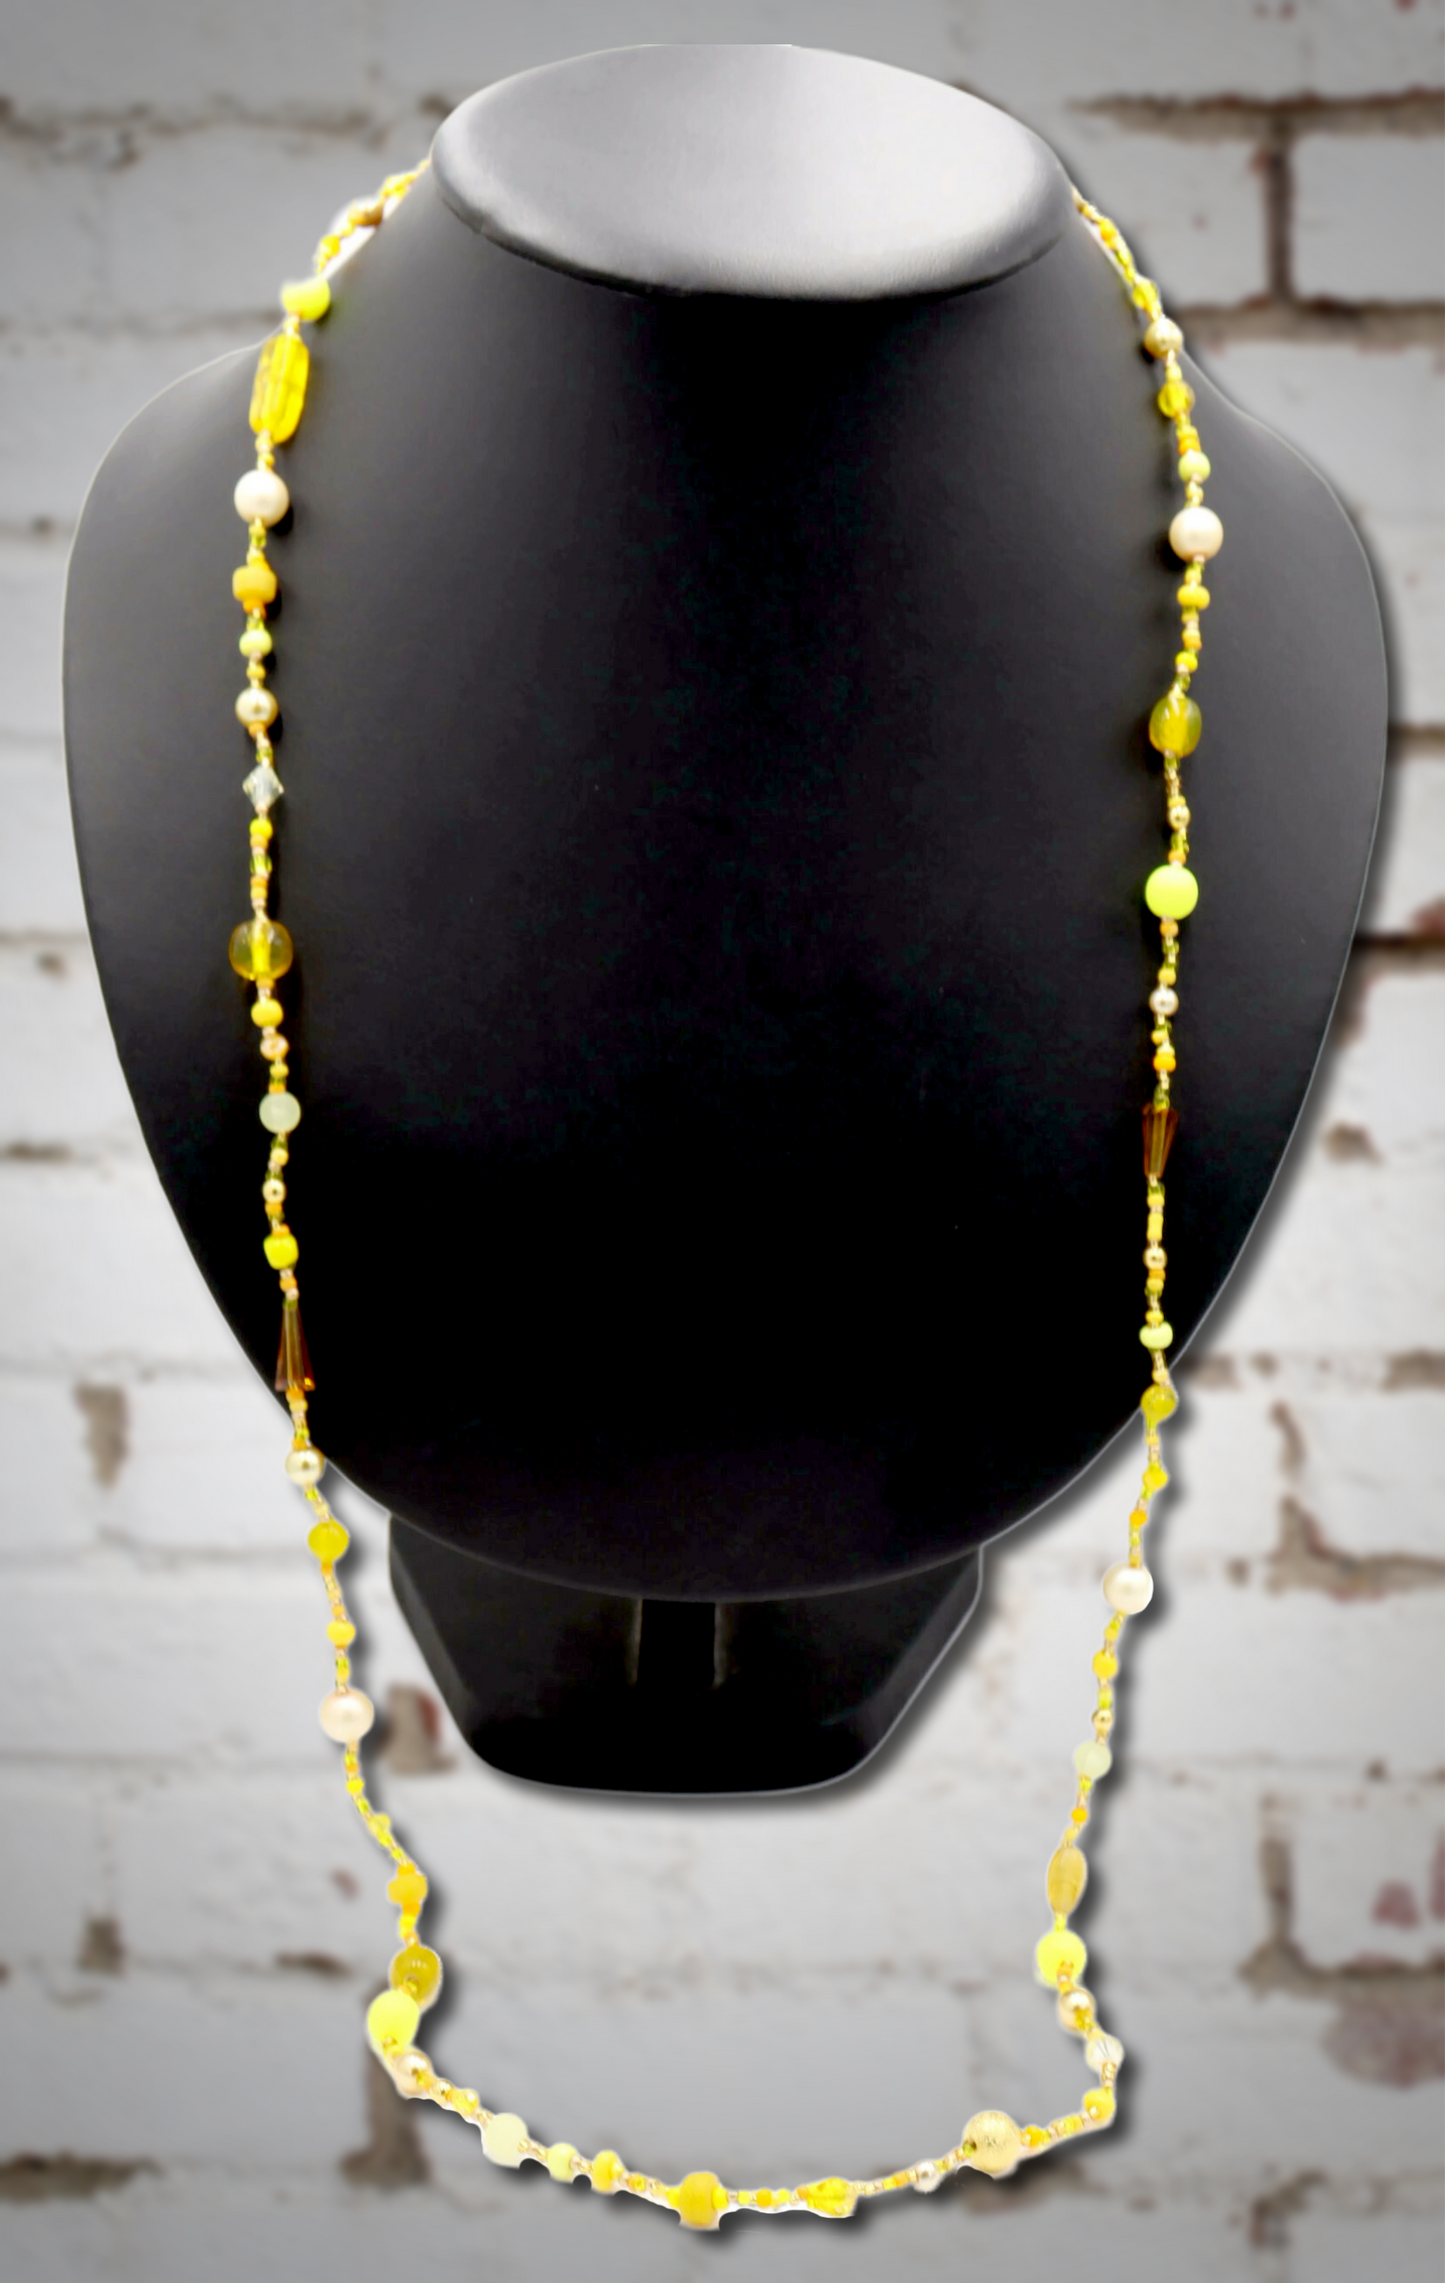 Call Me Mellow Yellow Long 36" Single Strand All Shades of Yellow Party Necklace by Monkey’s Mojo